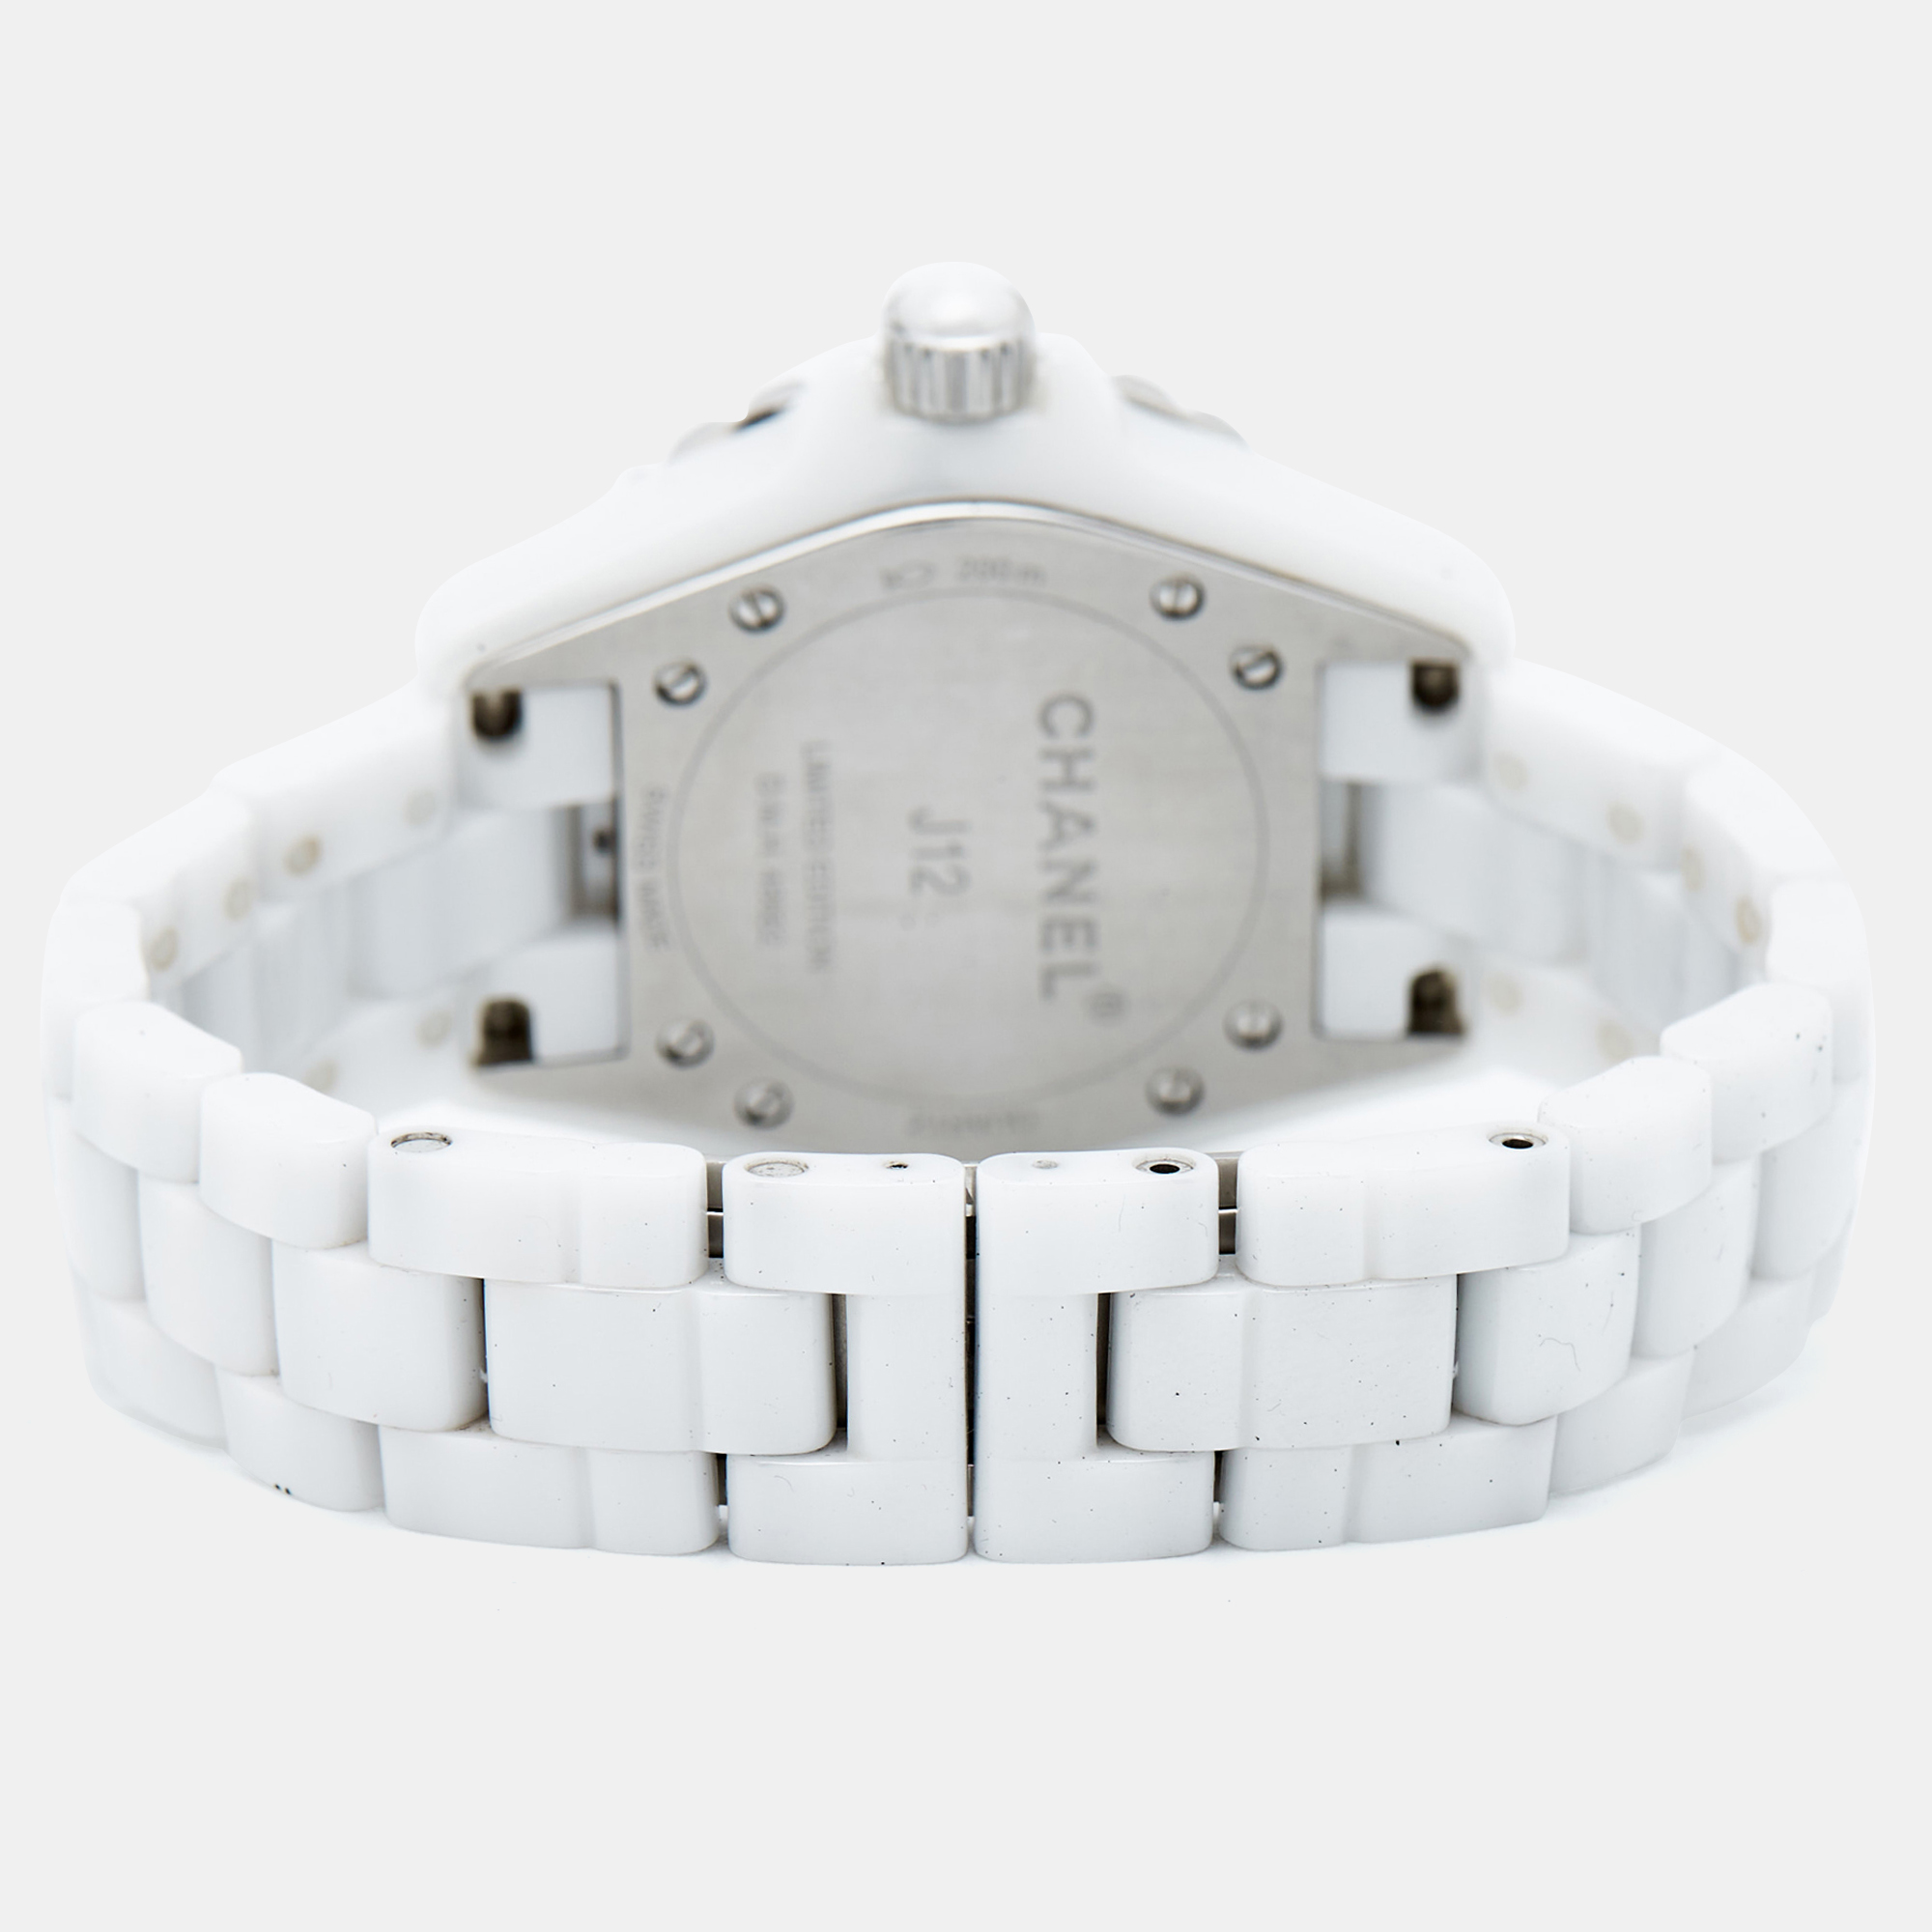 Chanel White Ceramic Stainless Steel Limited Edition J12 H4340 Women's Wristwatch 33 Mm